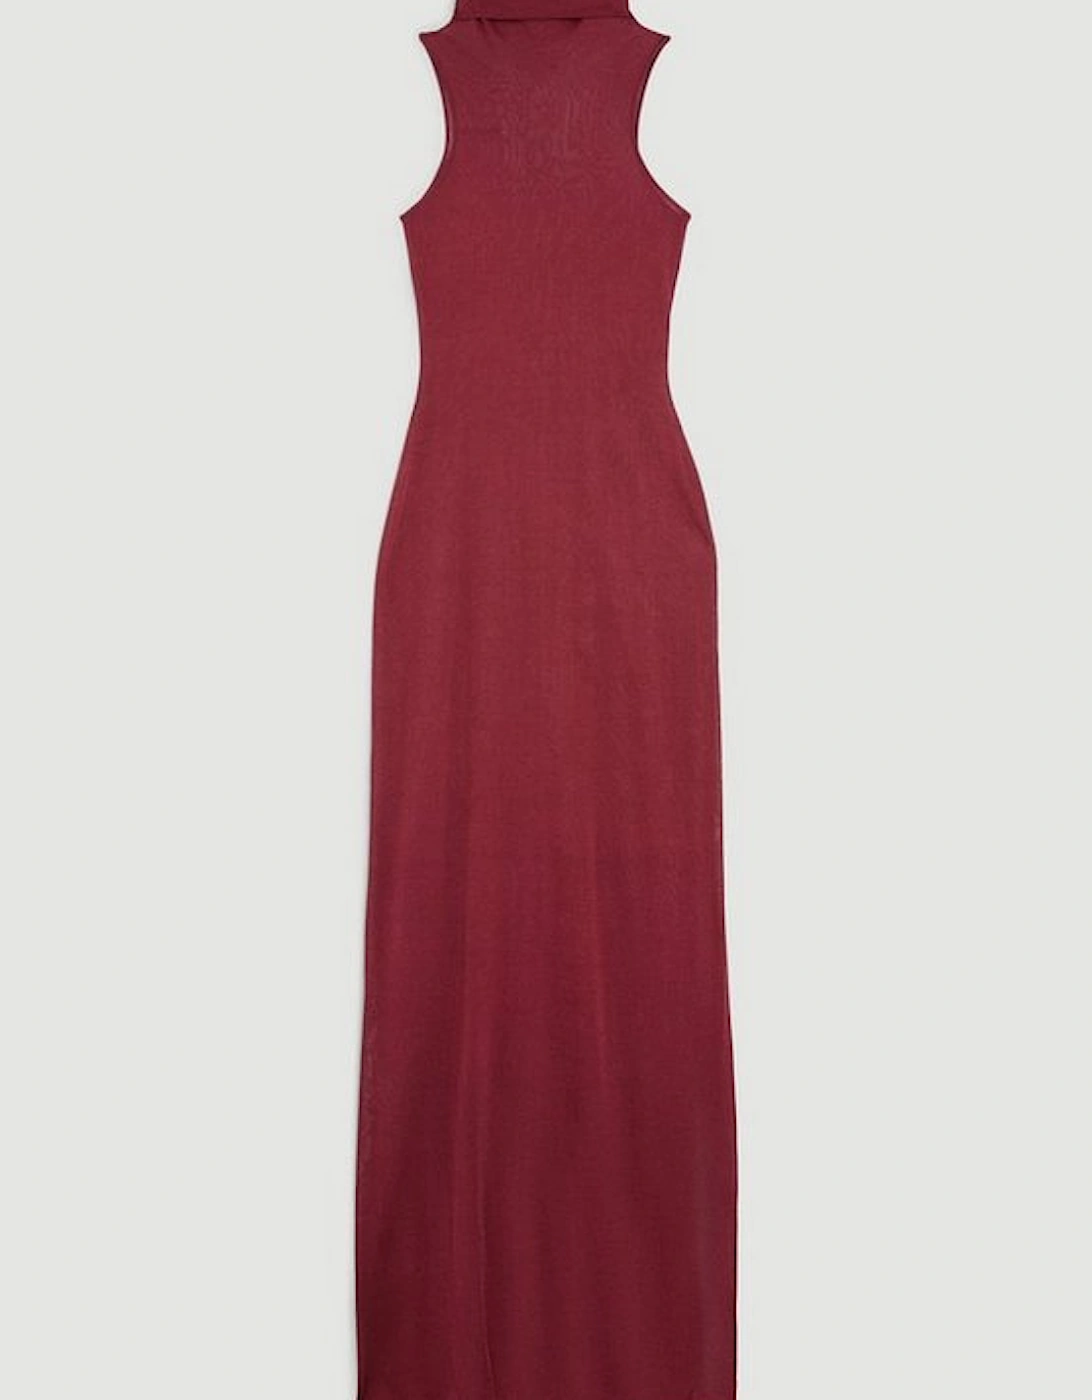 Sheer Knit Racer Style Maxi Dress